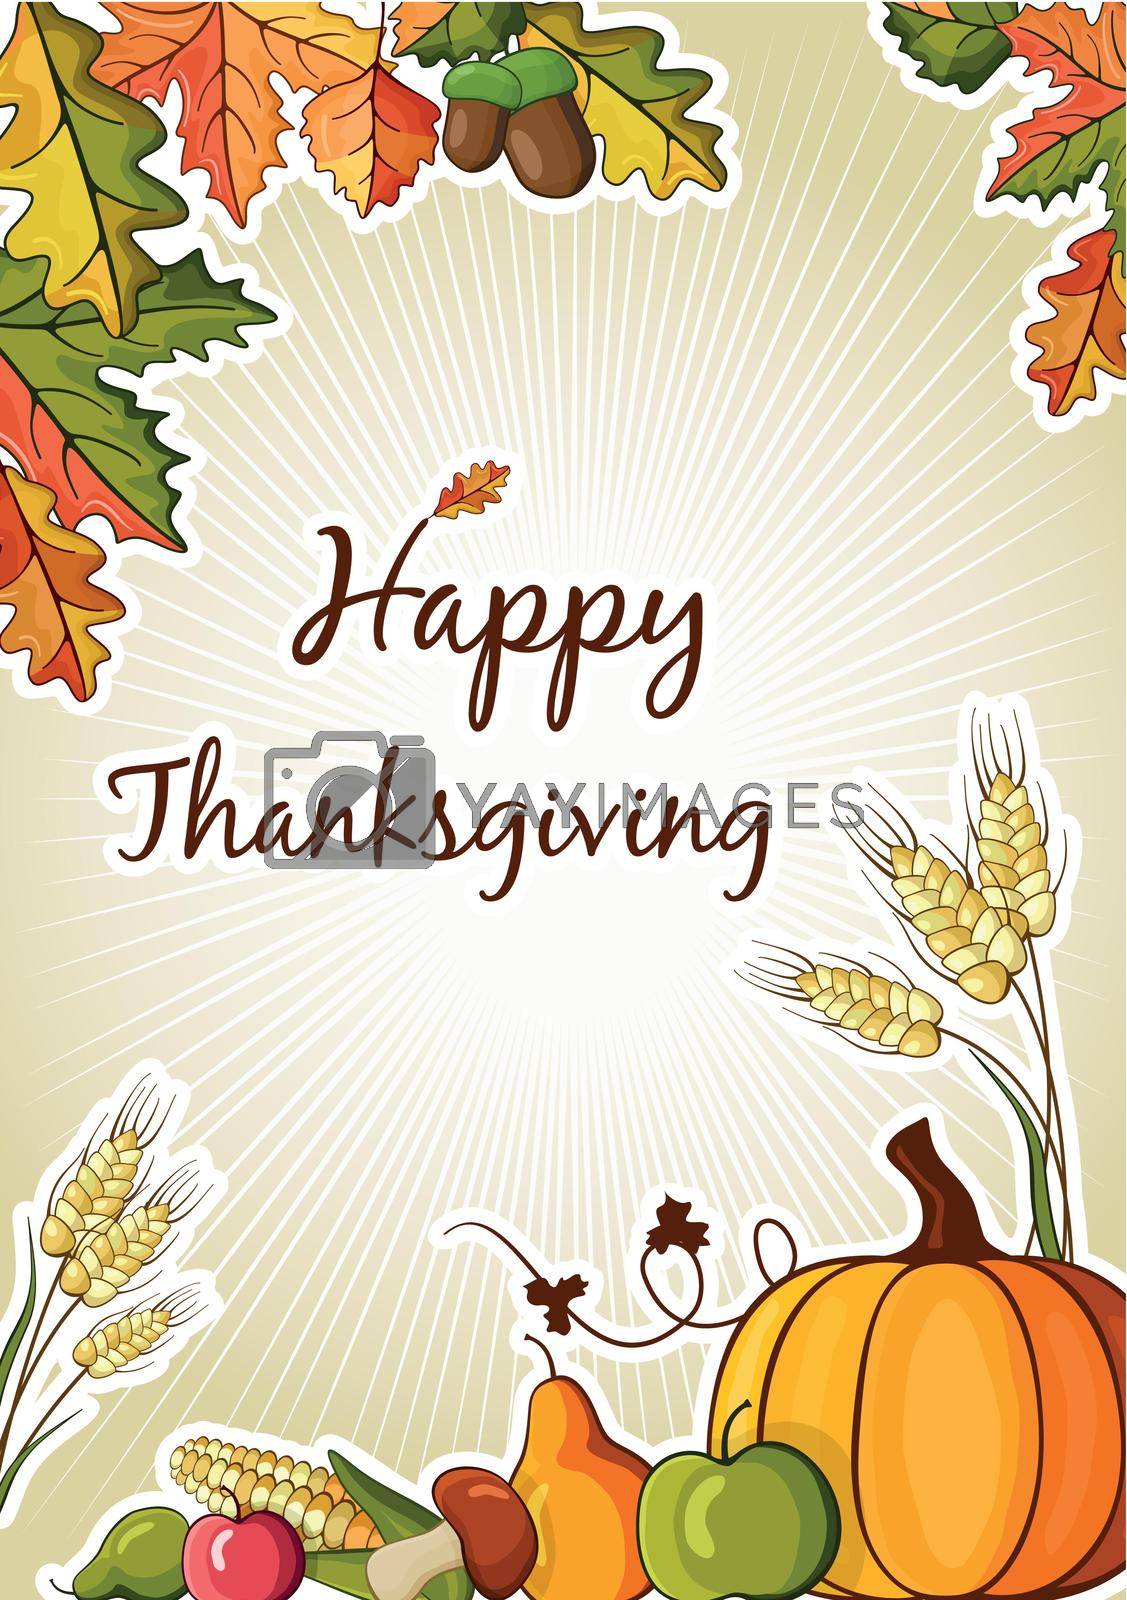 Happy Thanksgiving Day celebration flyer, banner or poster with pumpkins and autumn leaves on yellow background.